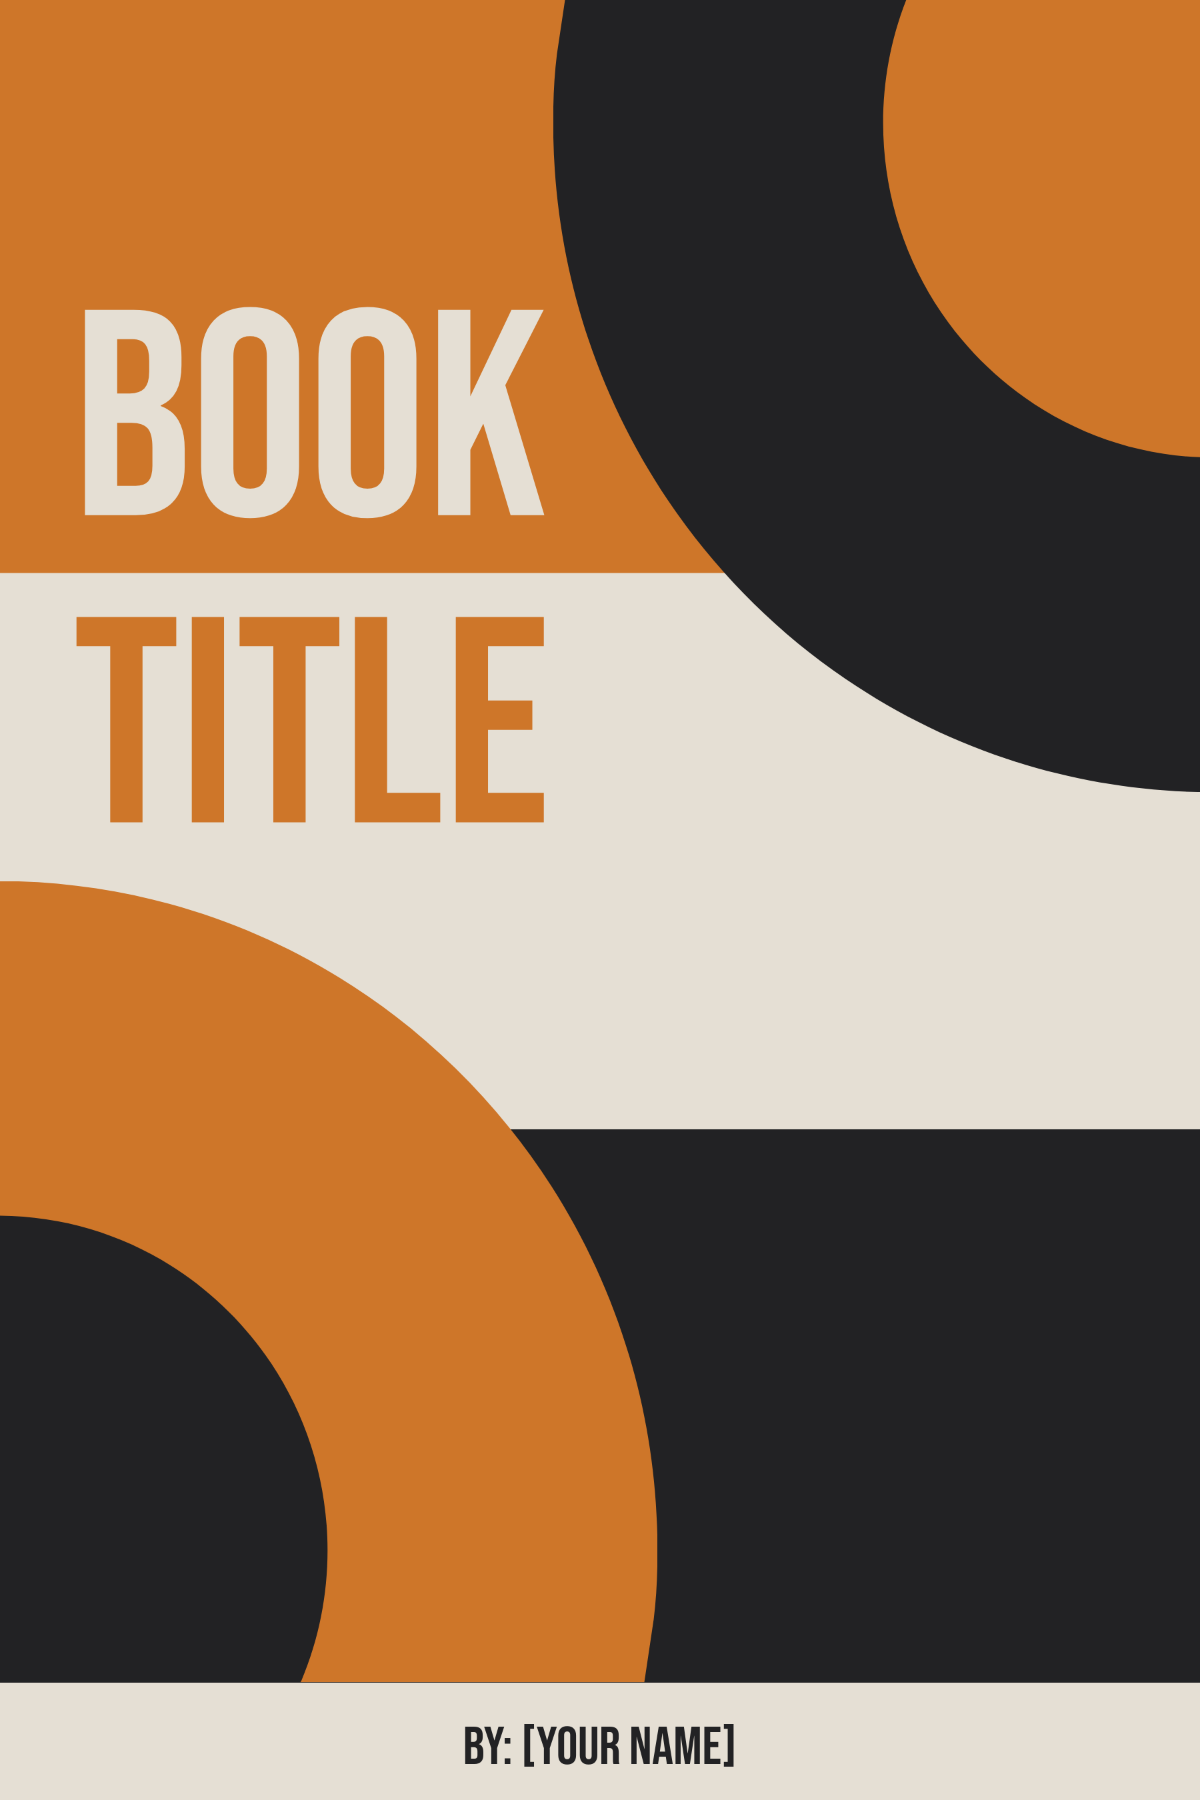 Book Cover Template